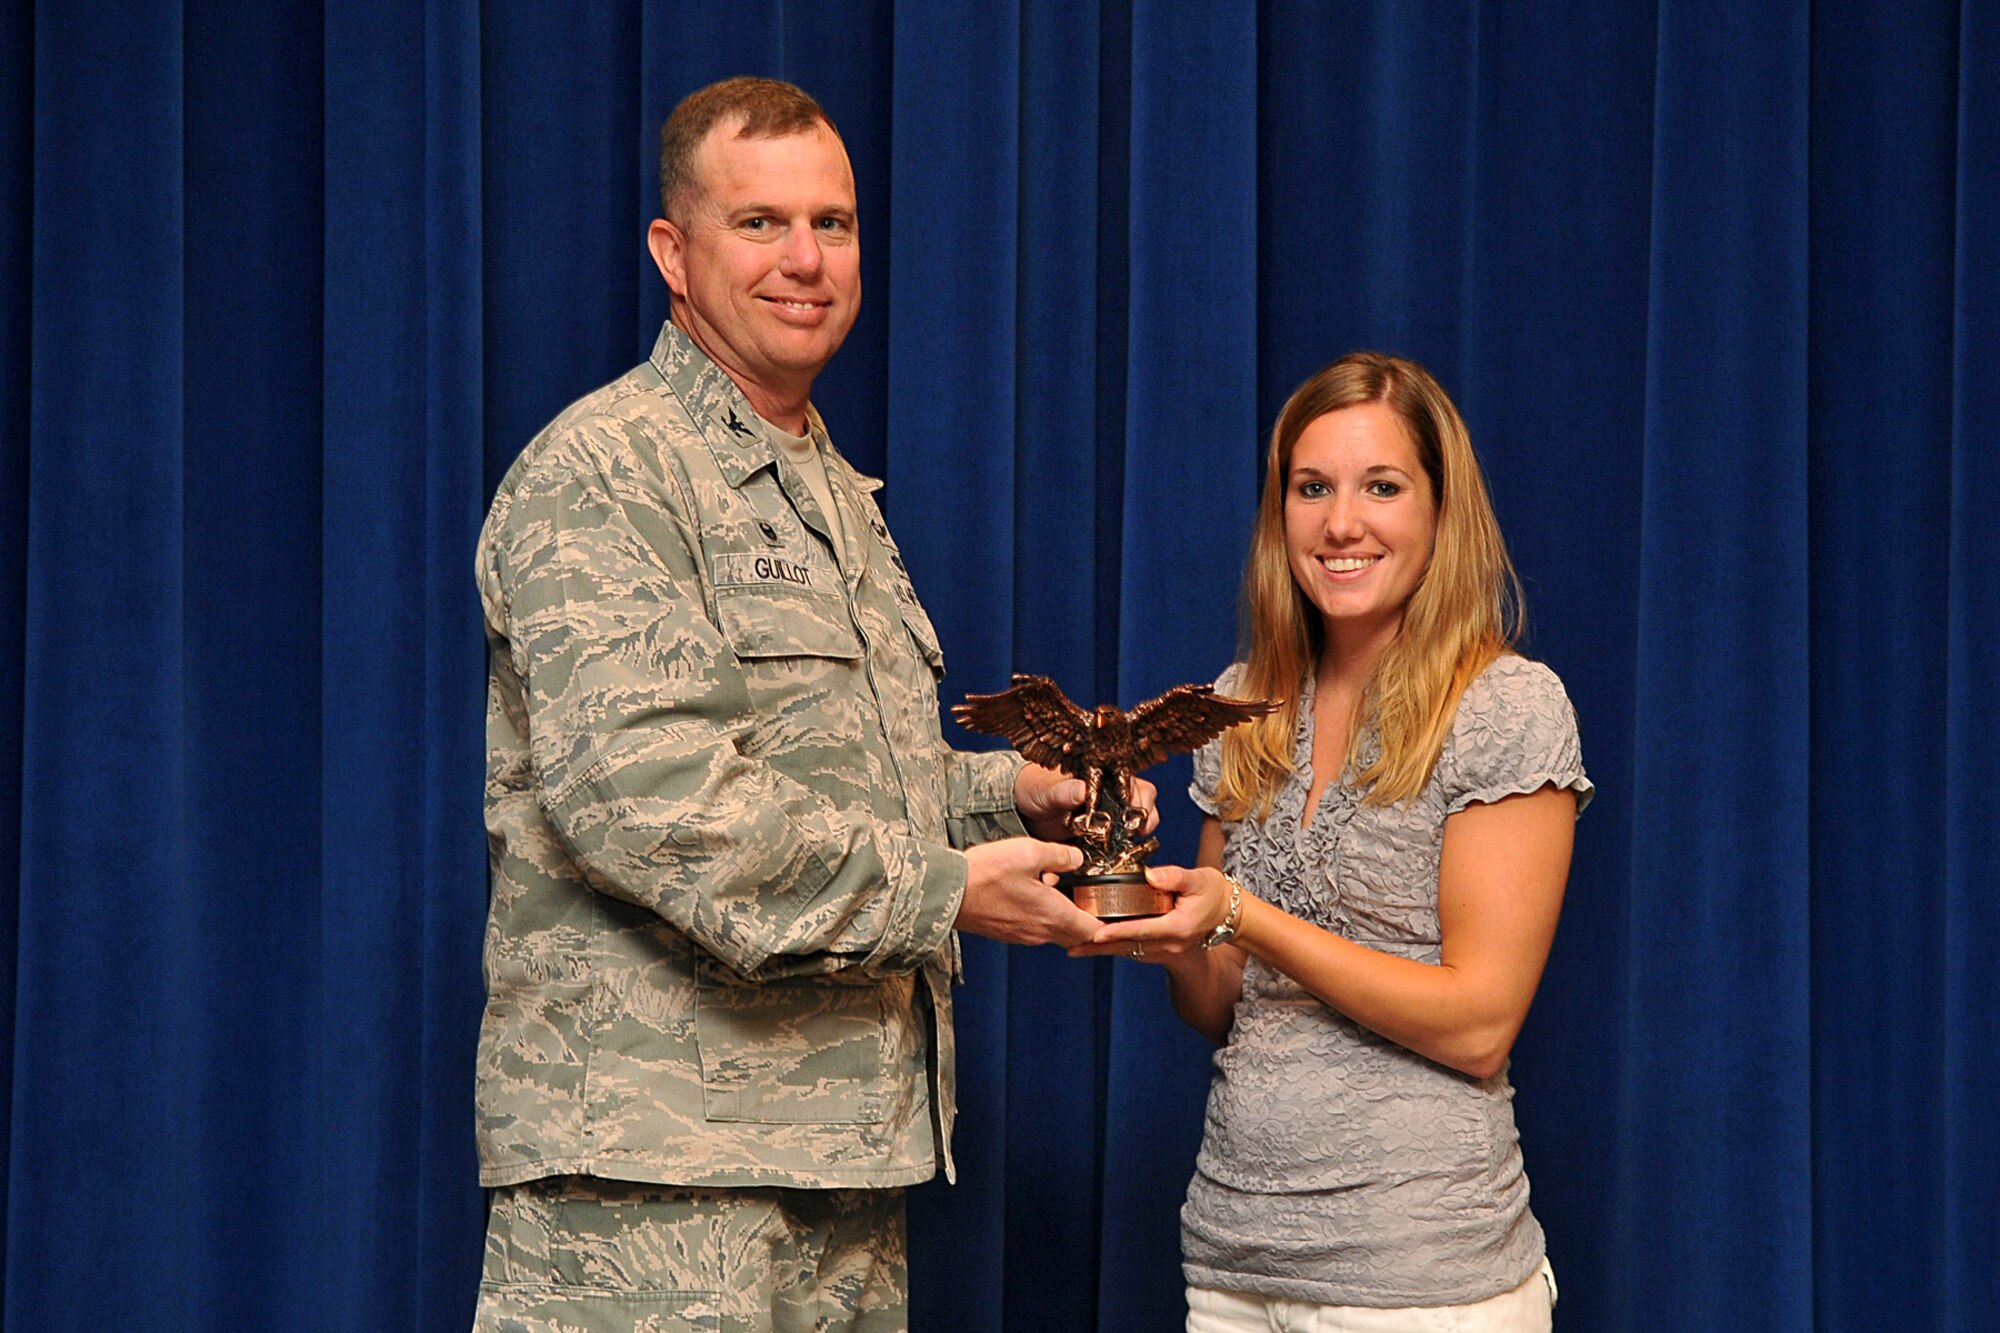 U.S. Air Force Colonel Gregory Guillot, 55th Wing commander, presents Erica Buum, wife of U.S. Air Force Staff Sgt. Anthony Buum, 55th Maintenance Group, with the 2013 Air Force Family Child Care Provider of the Year award July 21 during the weekly wing staff meeting at Offutt Air Force Base, Nebraska. She has provided child care on base since 2010 and during that time frame, has helped more than 80 families. (U.S. Air Force photo by Charles Haymond)